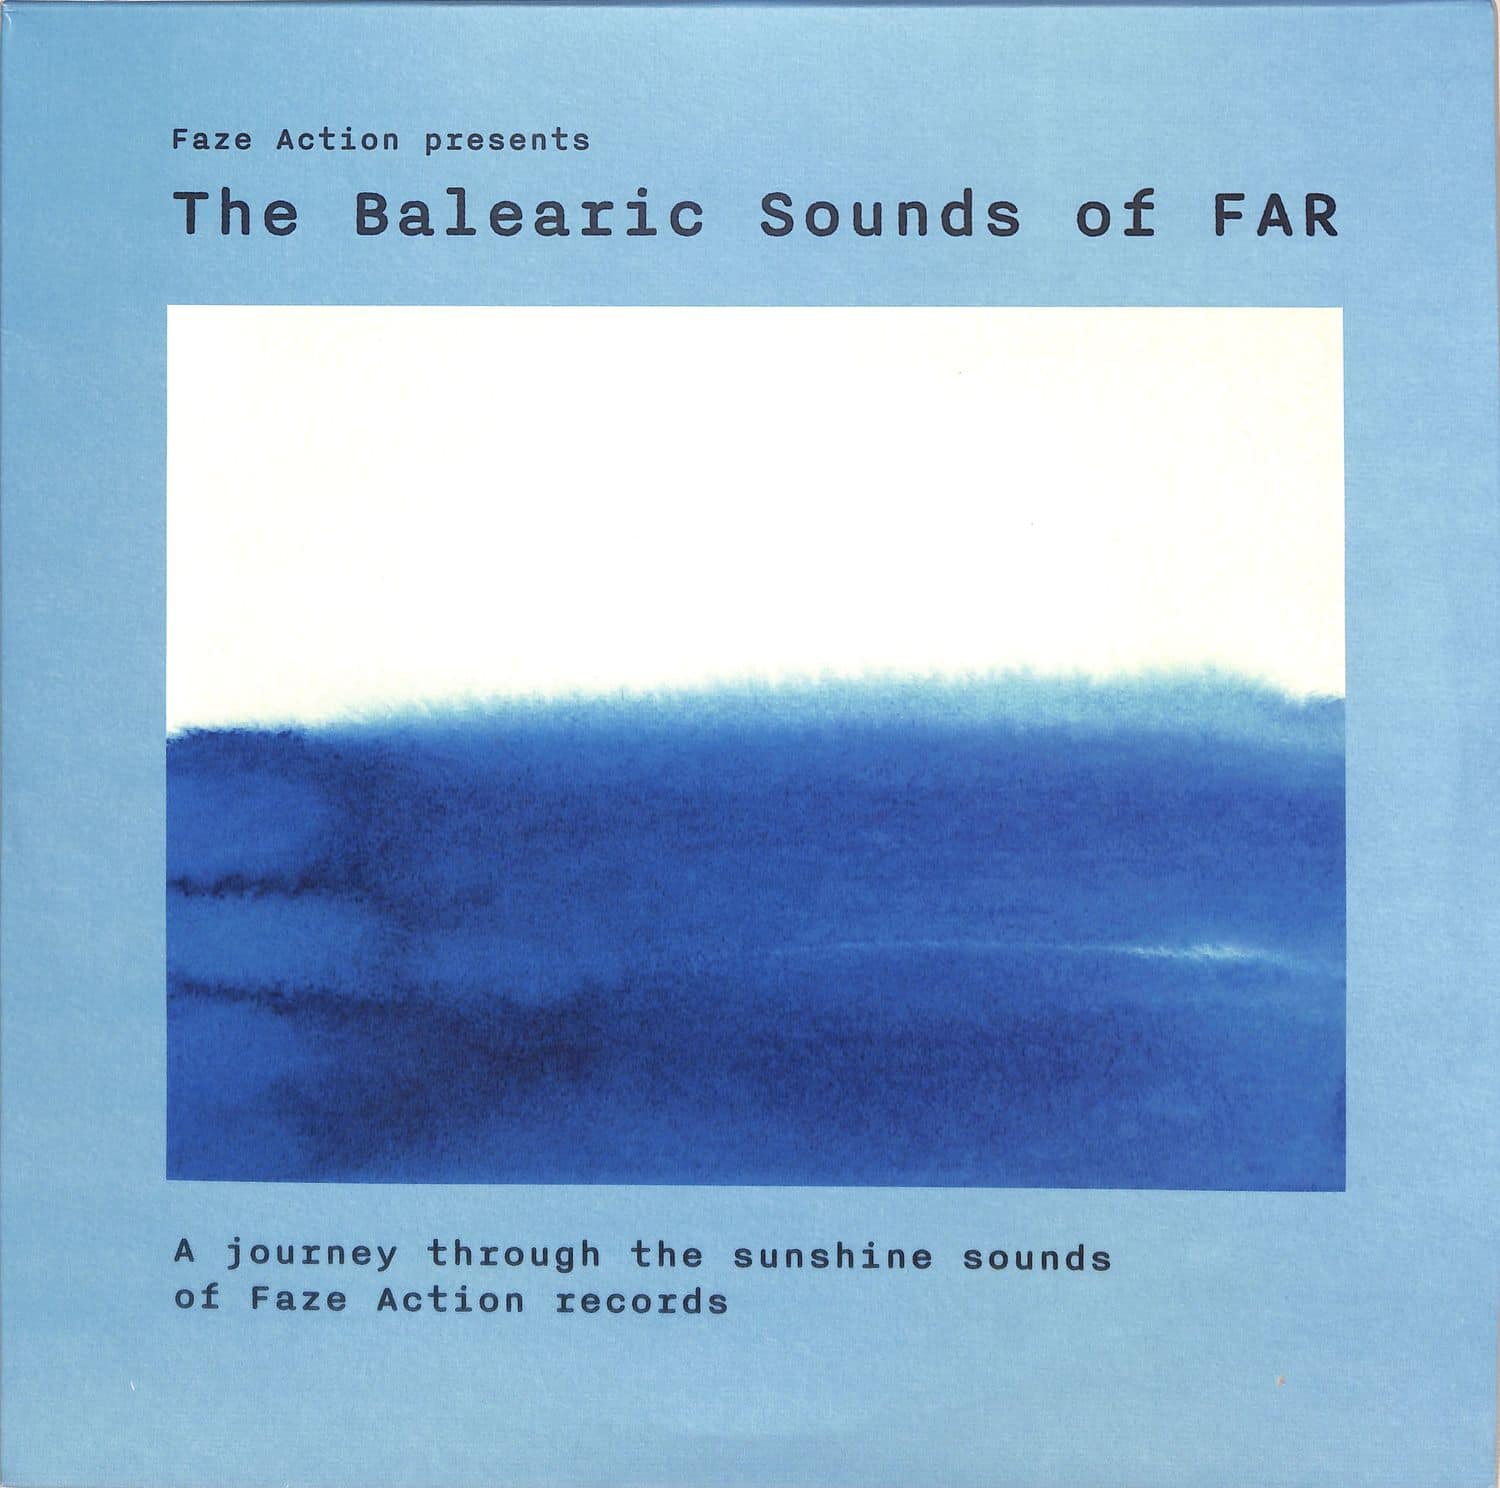 Faze Action - PRESENTS THE BALEARIC SOUNDS OF FAR 